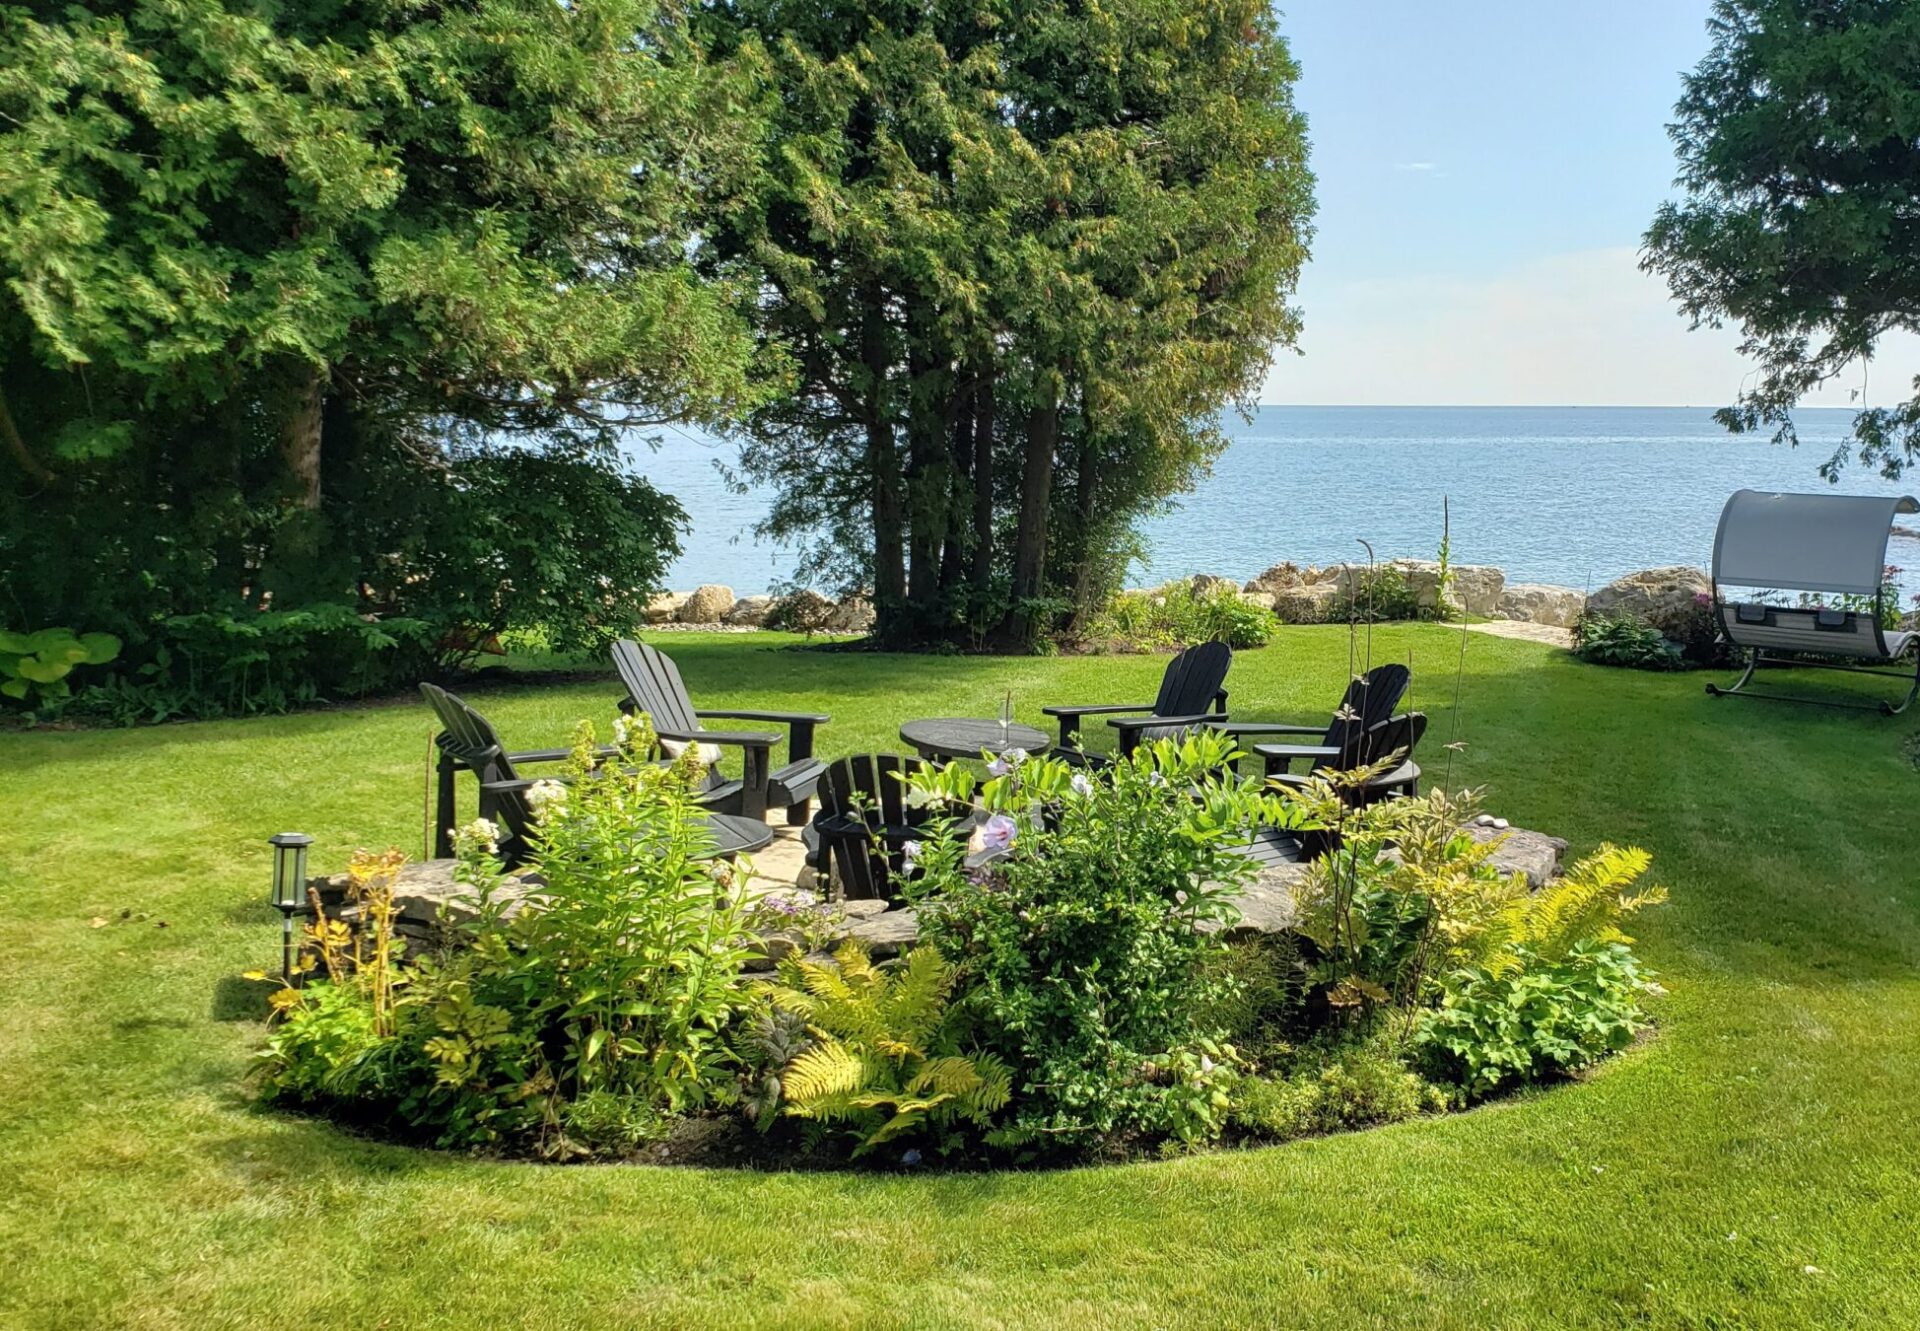 A serene garden with Adirondack chairs arranged around a fire pit, overlooking a calm sea, framed by lush greenery under a clear sky.